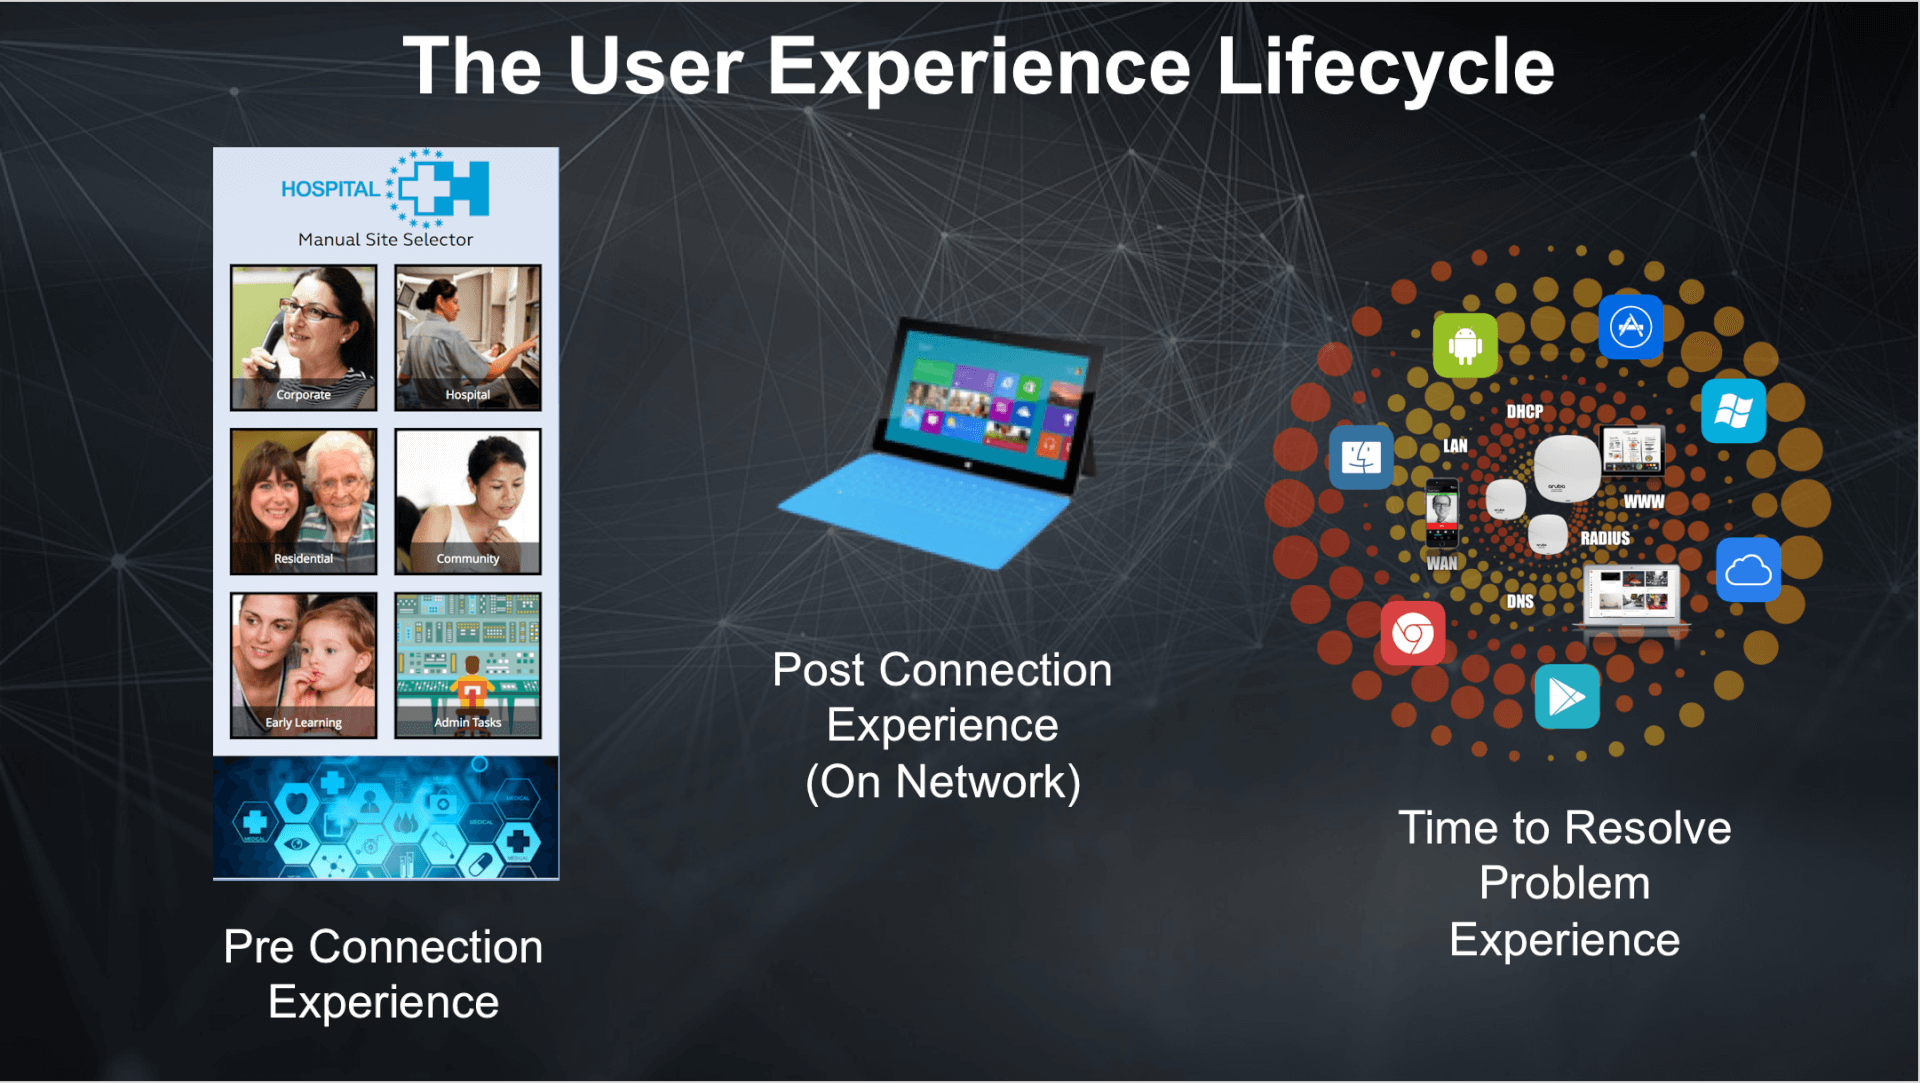 In the Age of Cloud, User Experience Must Be IT’s Top Priority